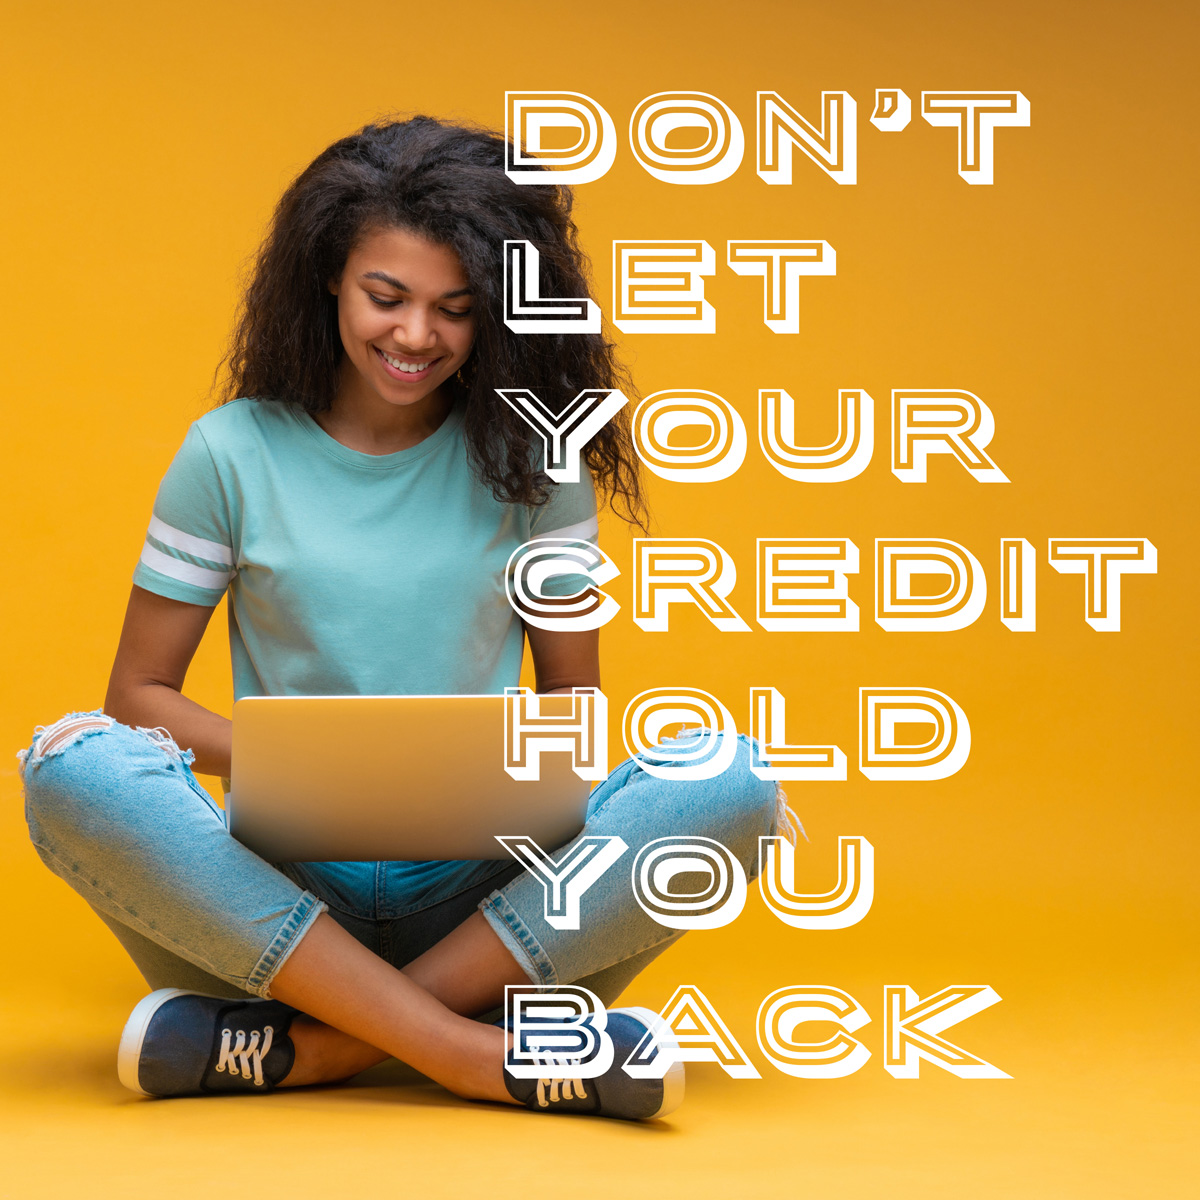 Is your credit score stopping you from looking for a home? Call us today to learn how our FHA programs may be the perfect solution for you!

#azrealtor #azrealtors #azrealtorlife #arizonarealtor #arizonarealtors #arizonarealty #azrealestate